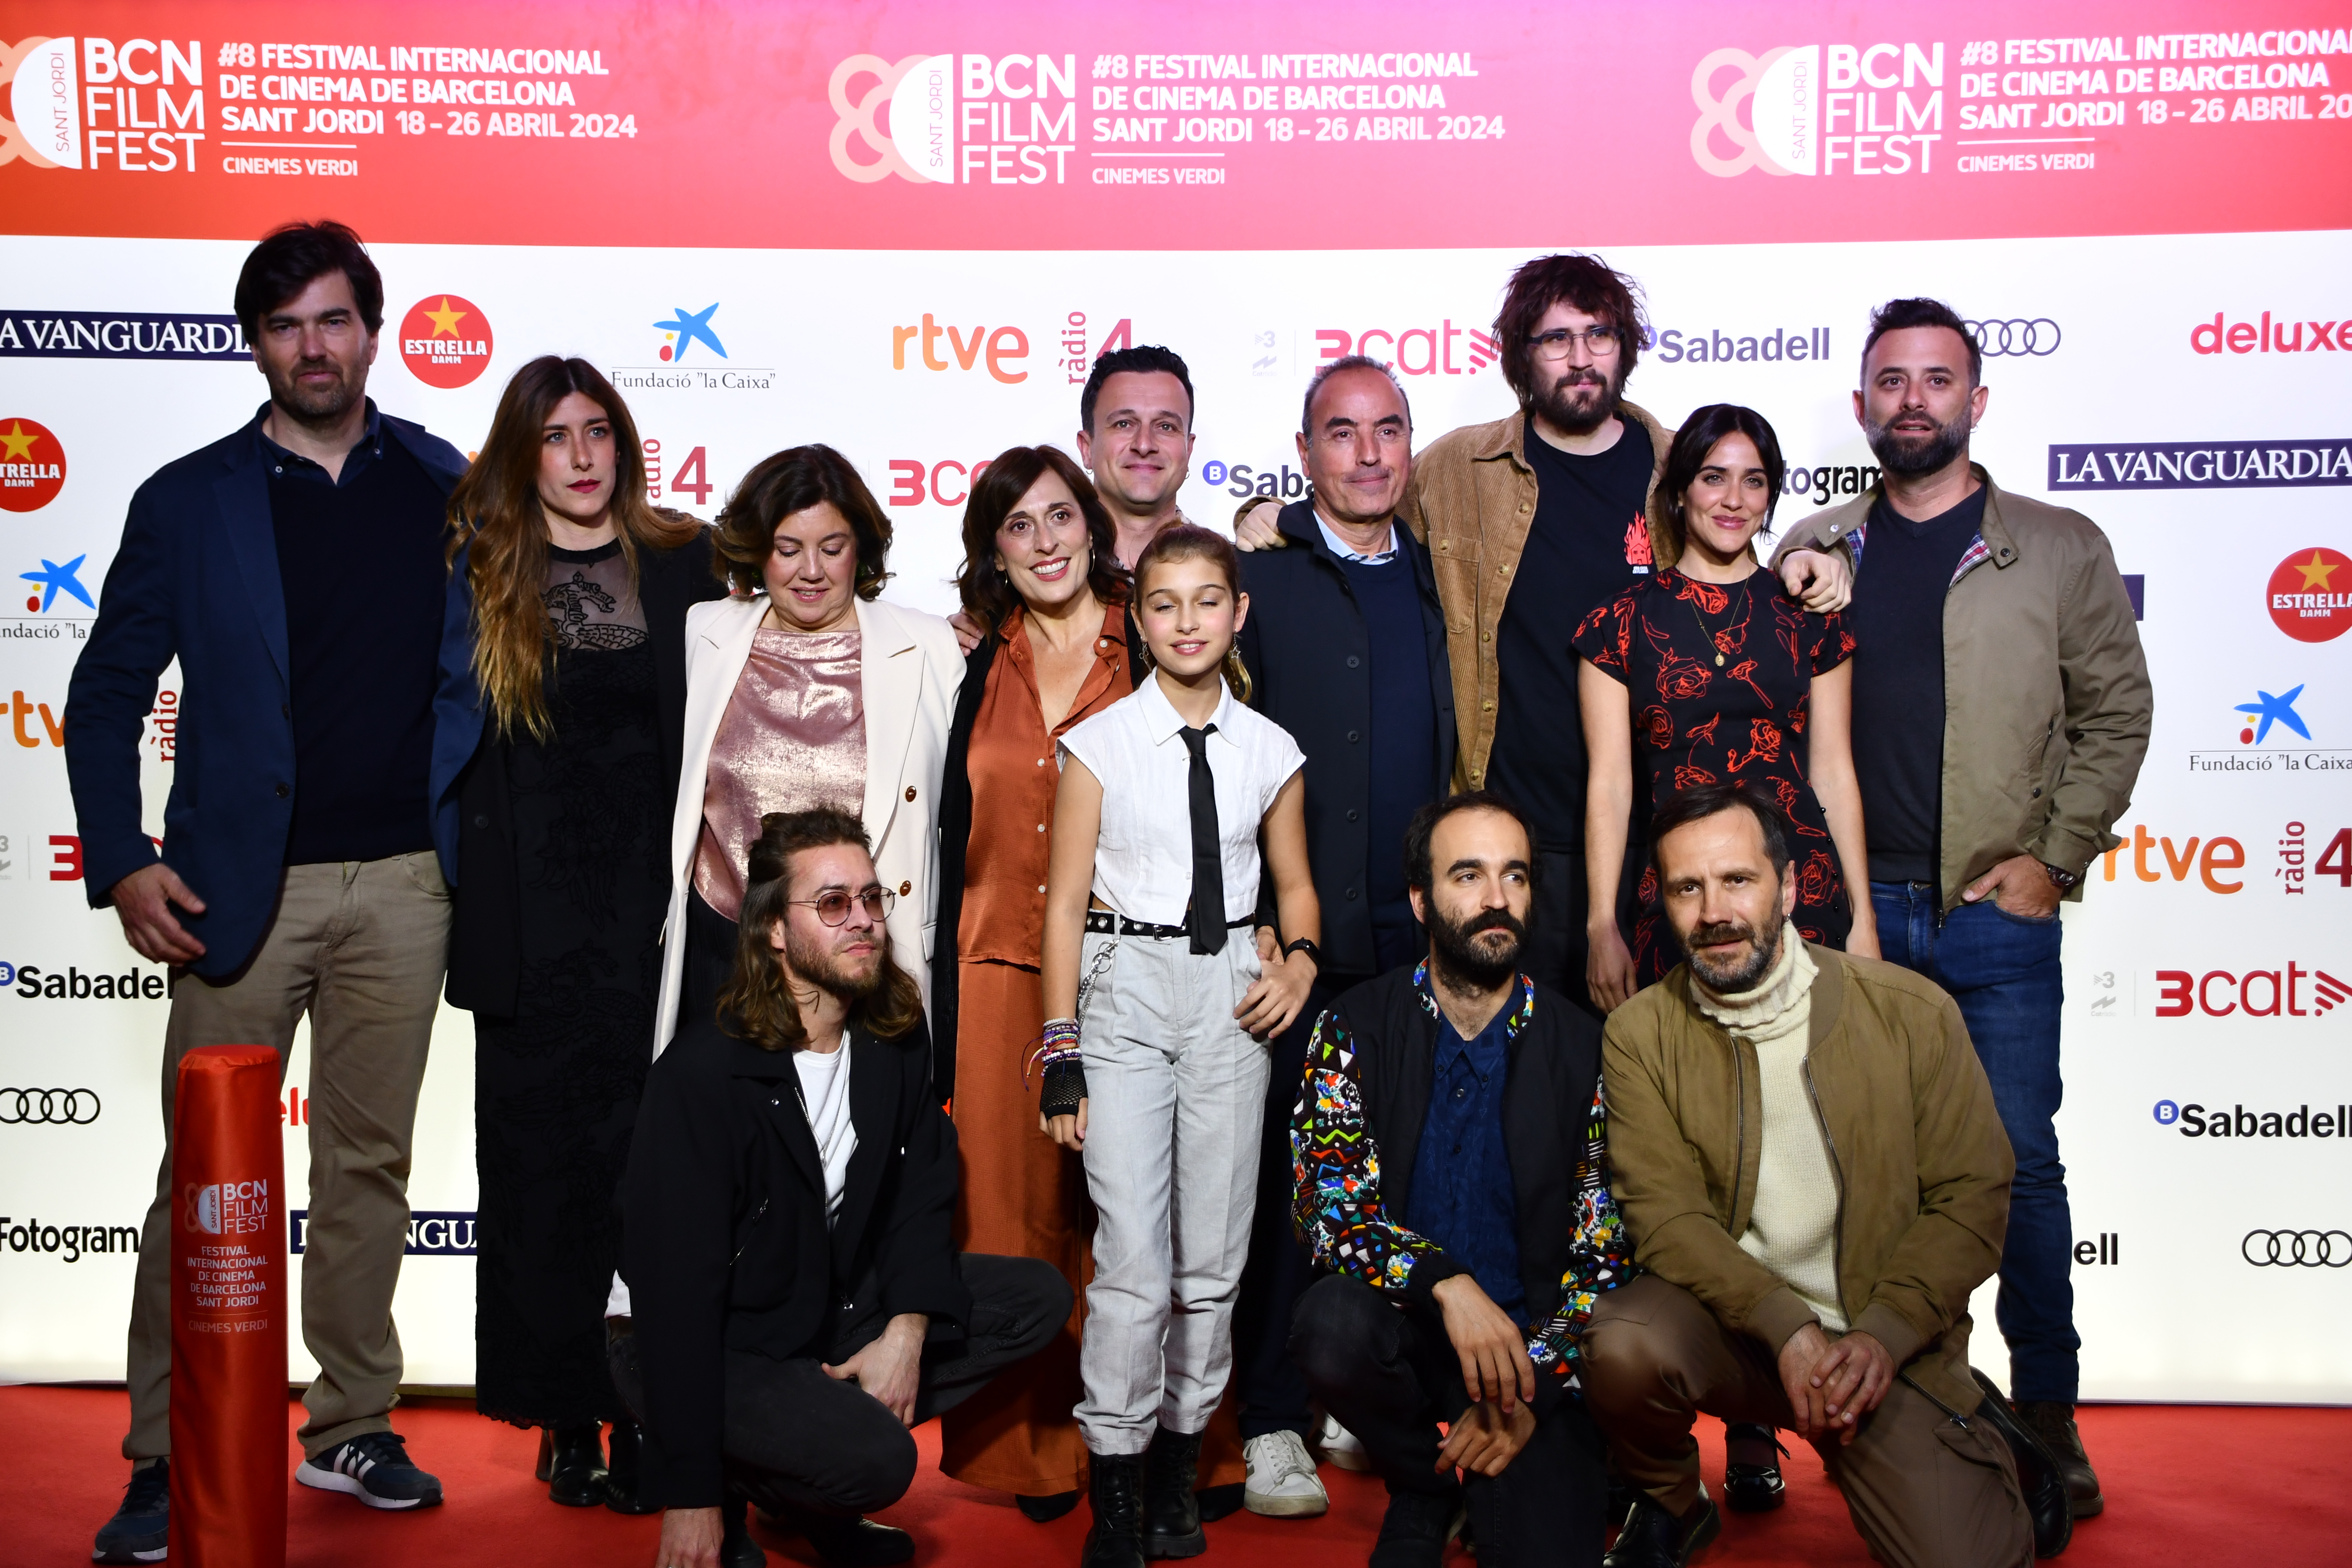 Cast and crew of 'Casa en flames' at the opening of the BCN Film Fest